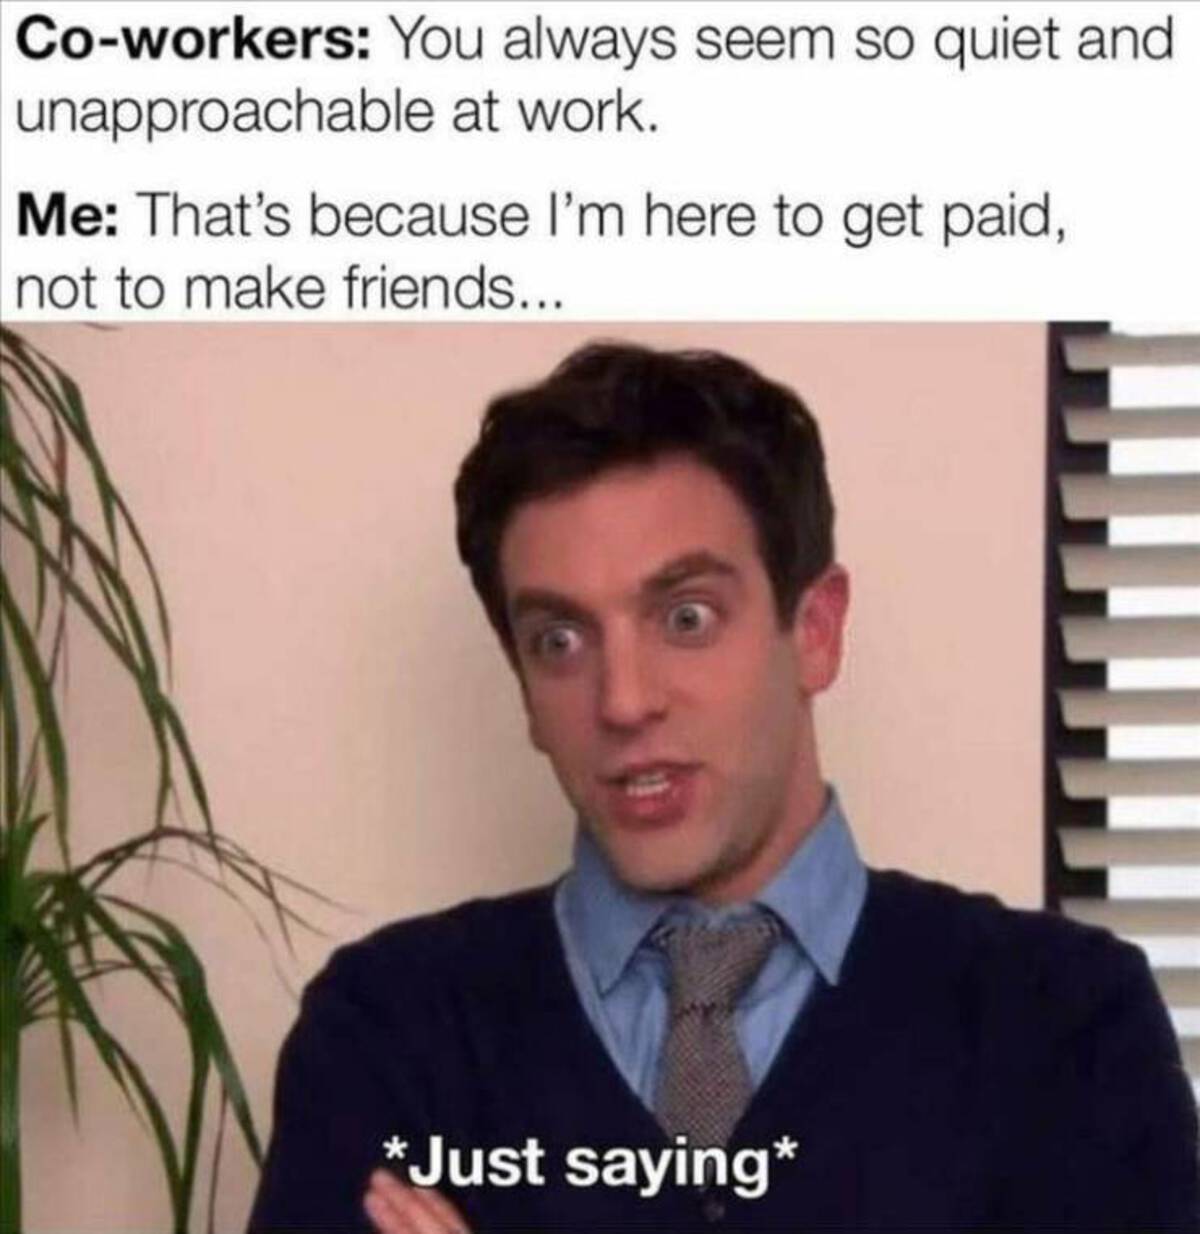 office work memes - Coworkers You always seem so quiet and unapproachable at work. Me That's because I'm here to get paid, not to make friends... Just saying